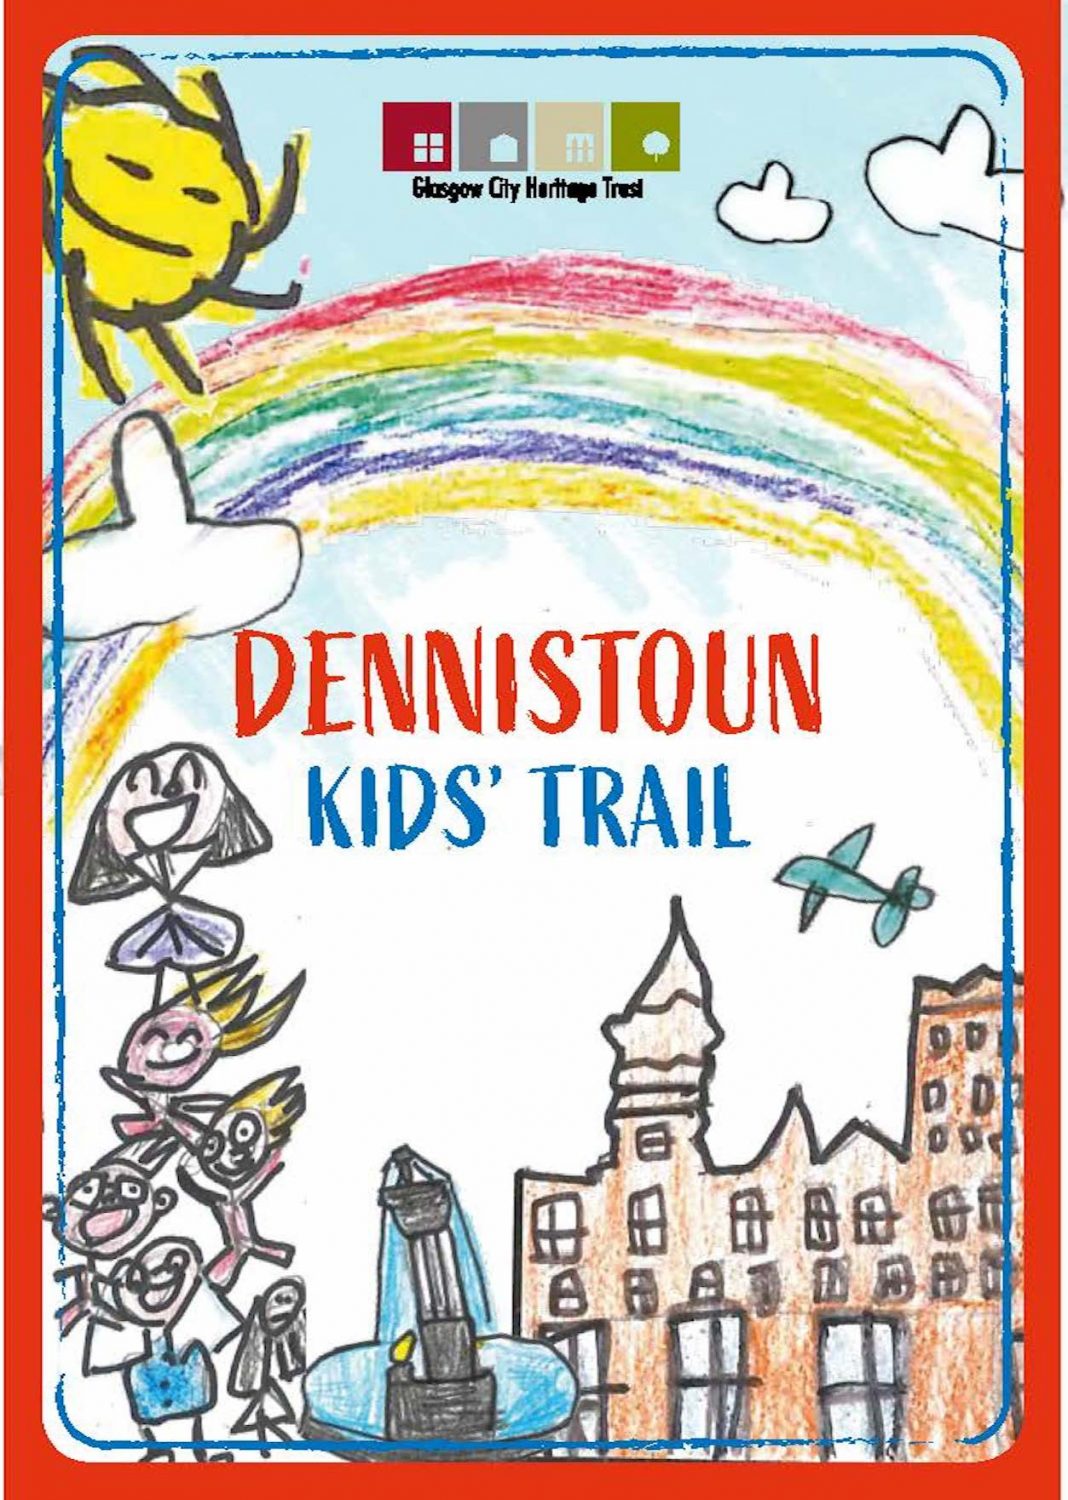 Download our Kid's Heritage Trails!